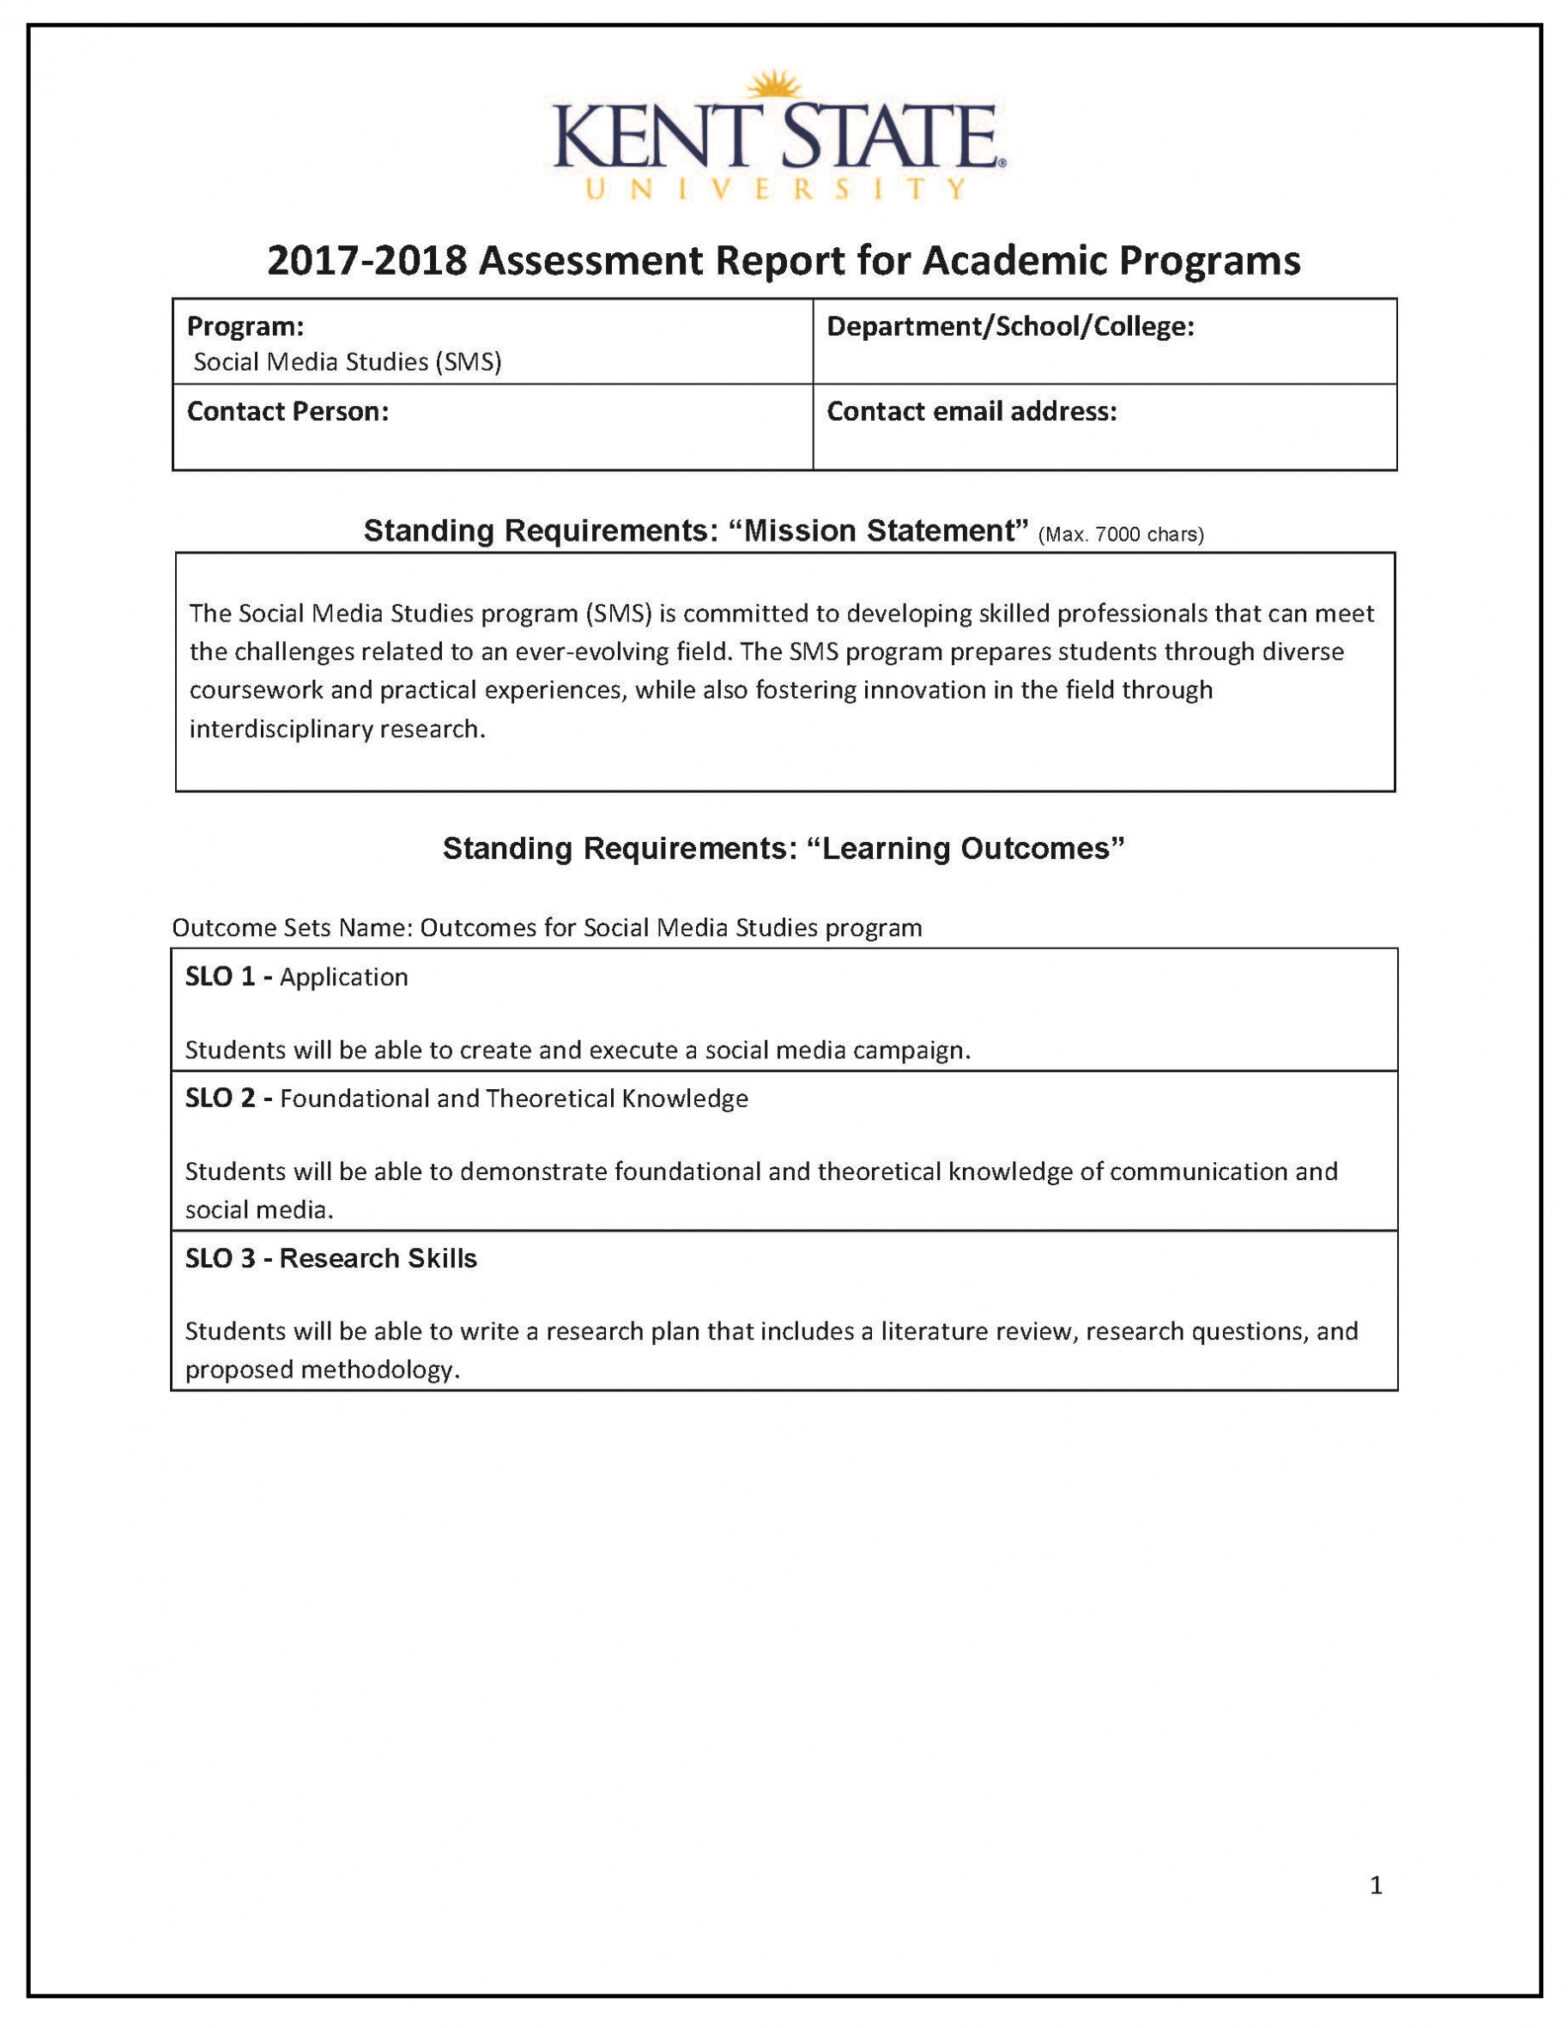 Assessment Report Sample | Kent State University with Template For Evaluation Report